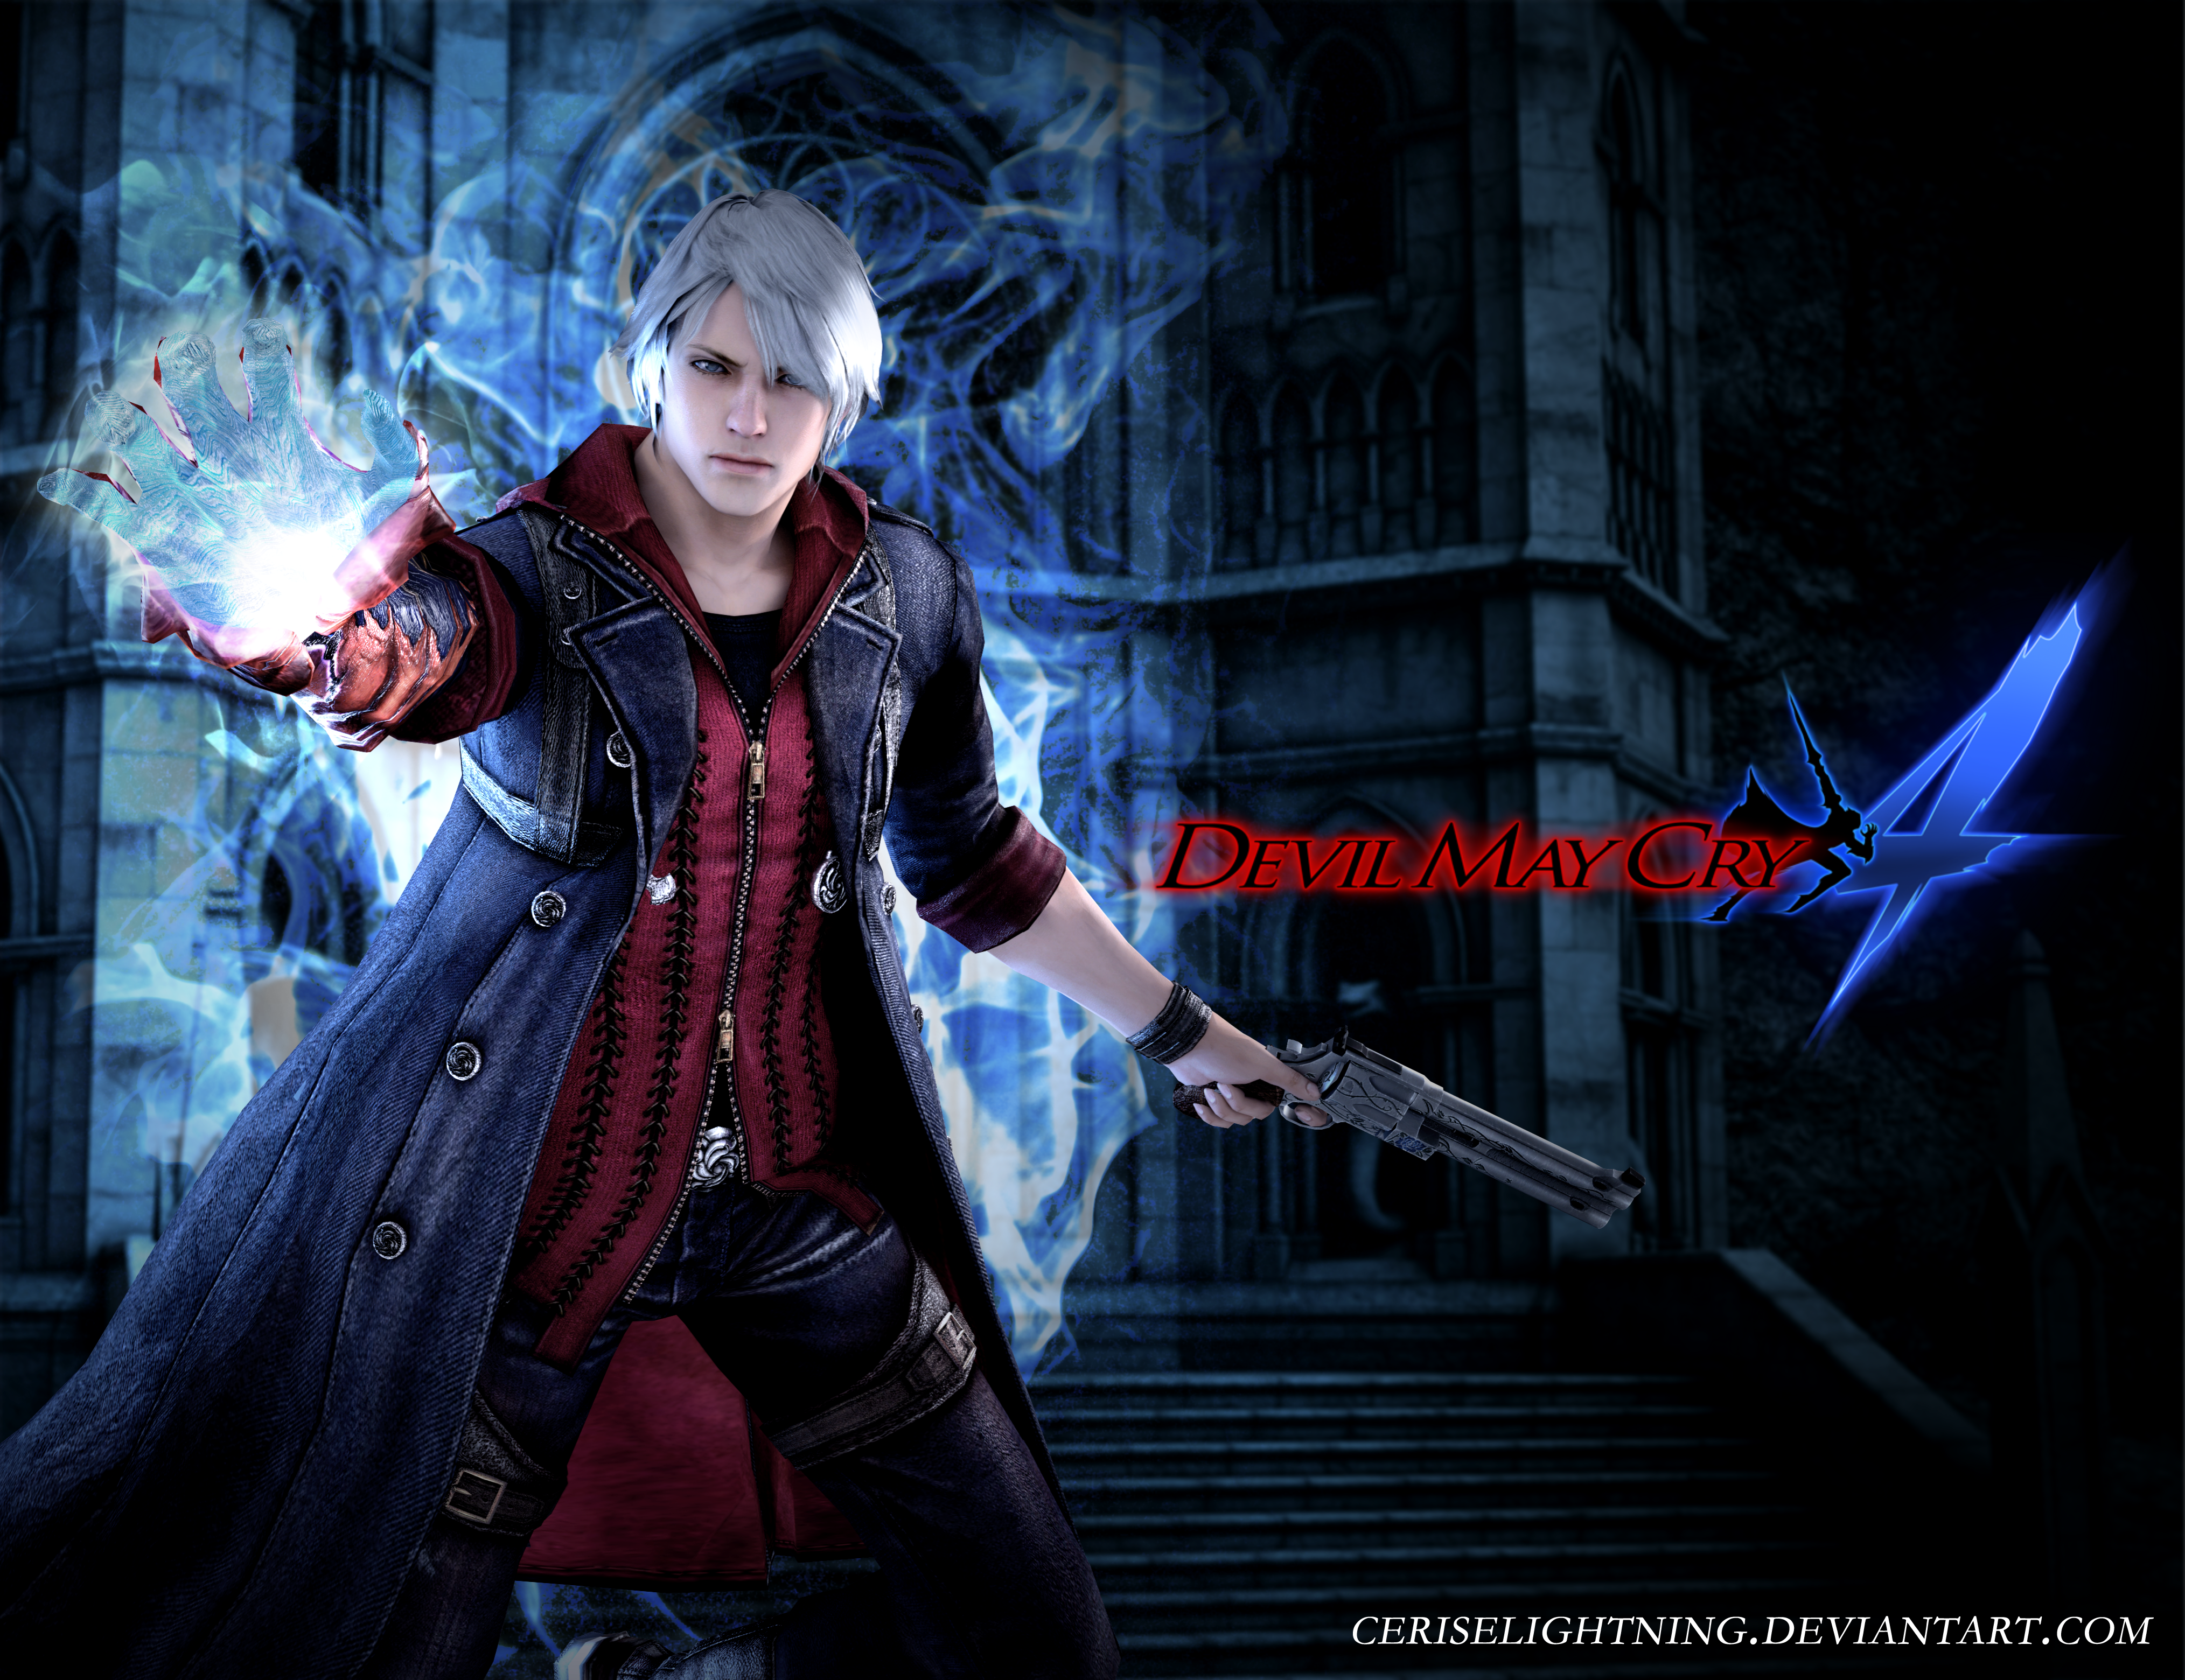 Devil May Cry 4 Wallpapers Video Game Hq Devil May Cry 4 Pictures 4k Wallpapers 2019